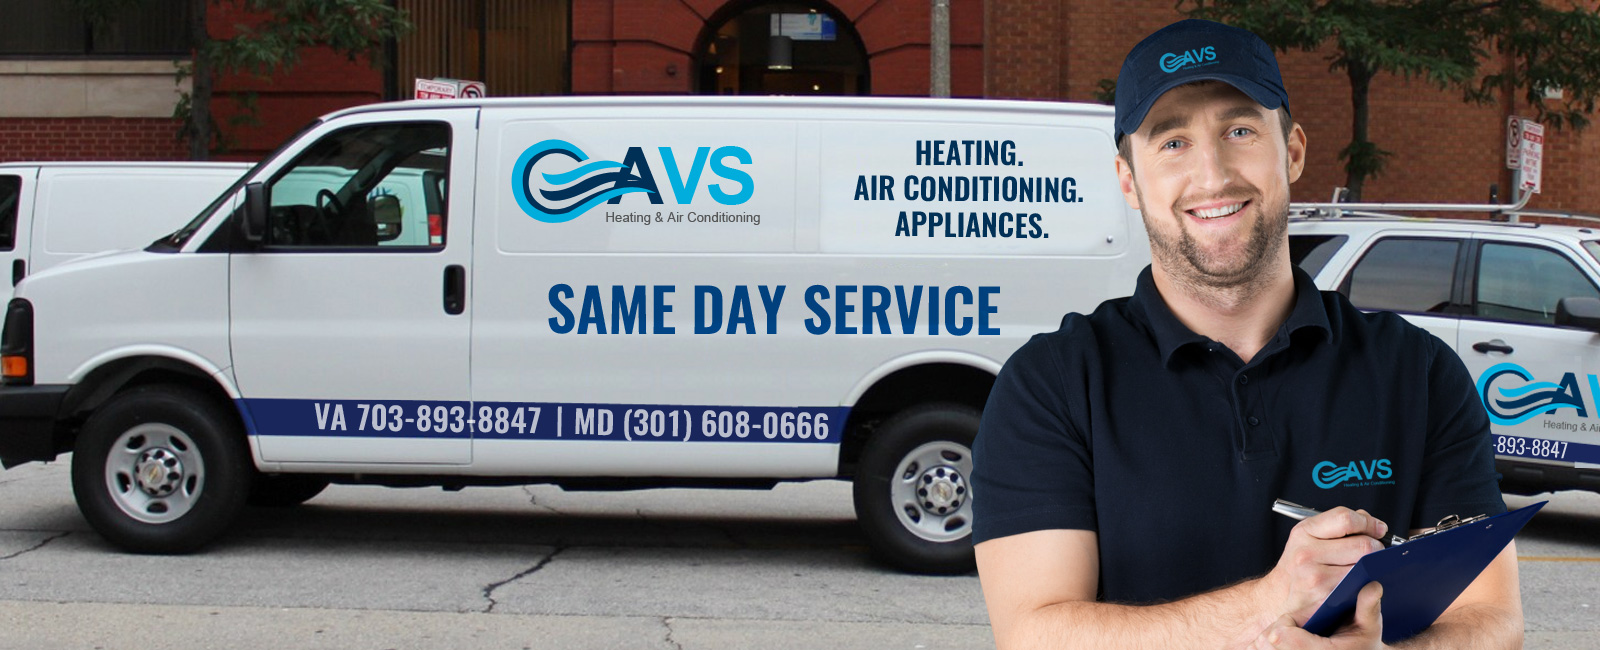 Springfield HVAC Contractor | Heating System, Heat Pump, Fireplace and AC Installation & Repair services